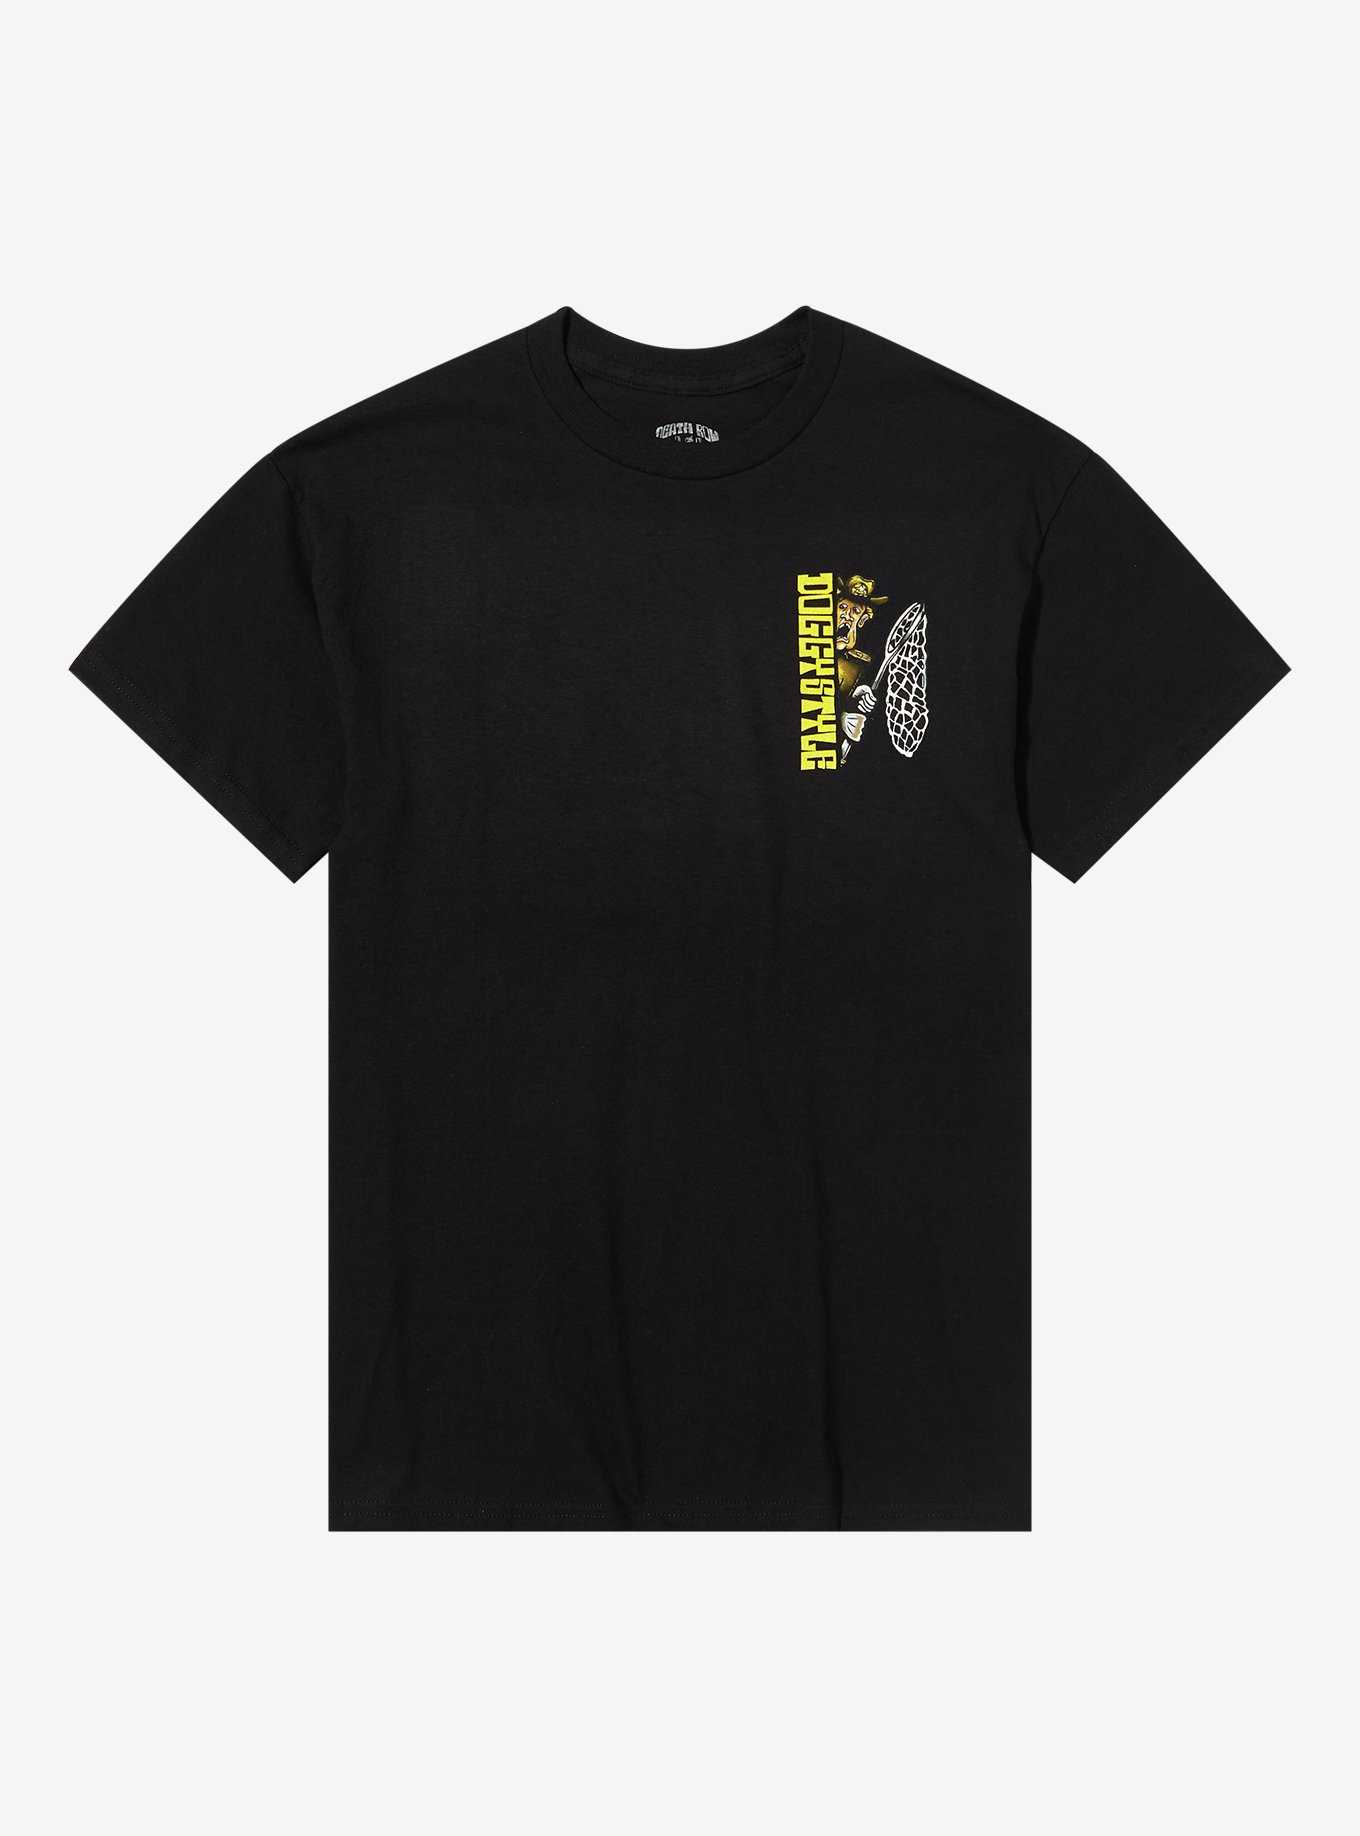 Snoop Dogg Doggystyle 30th Anniversary T-Shirt, , hi-res